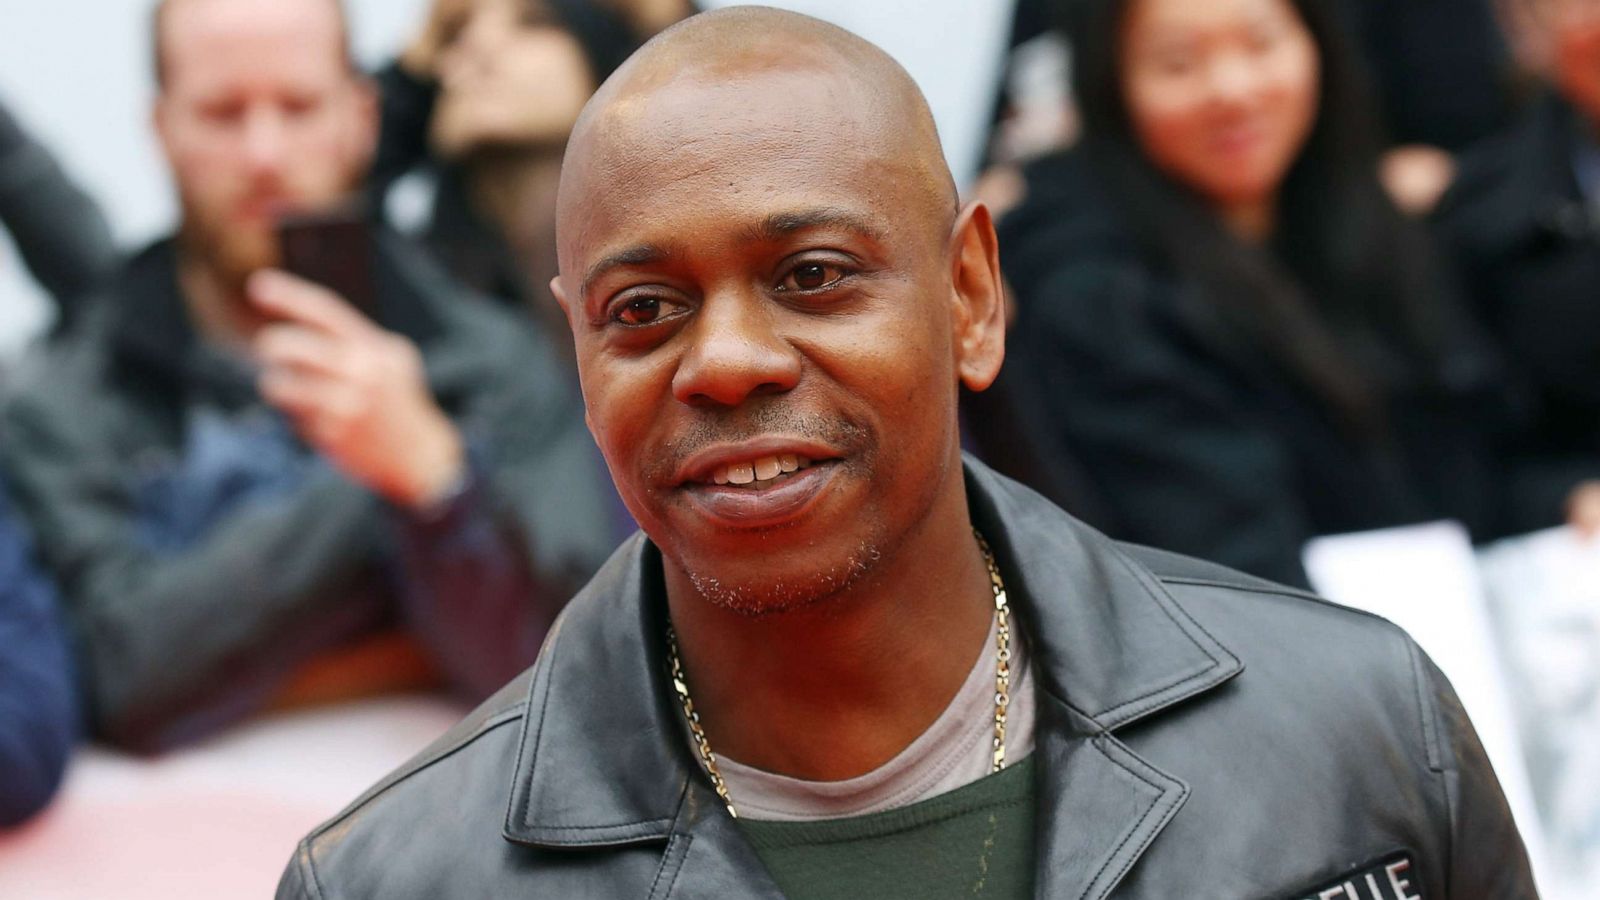 Dave Chappelle to be awarded Mark Twain Prize for American Humor